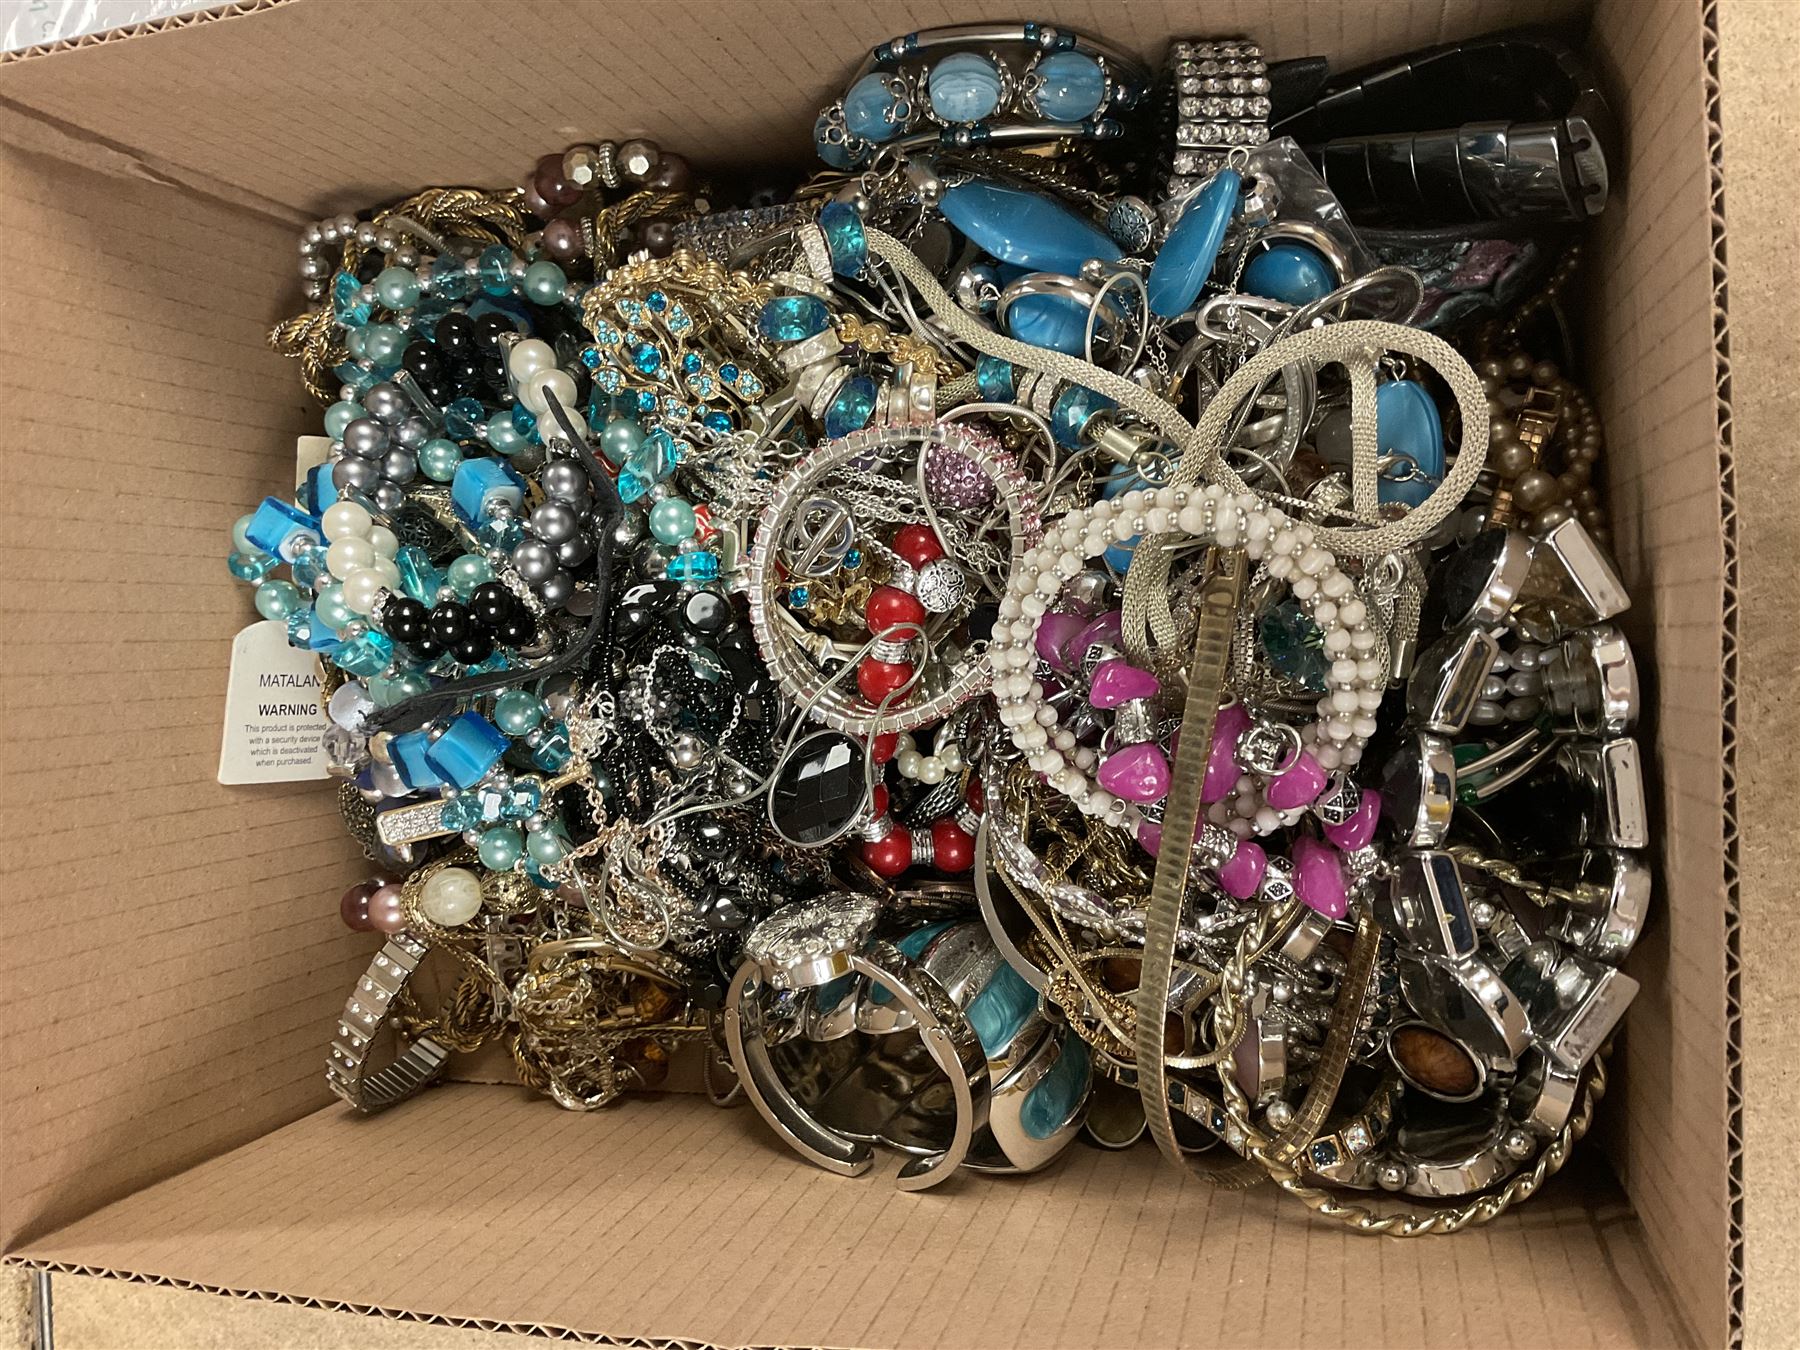 Collection of jewellery including bracelets